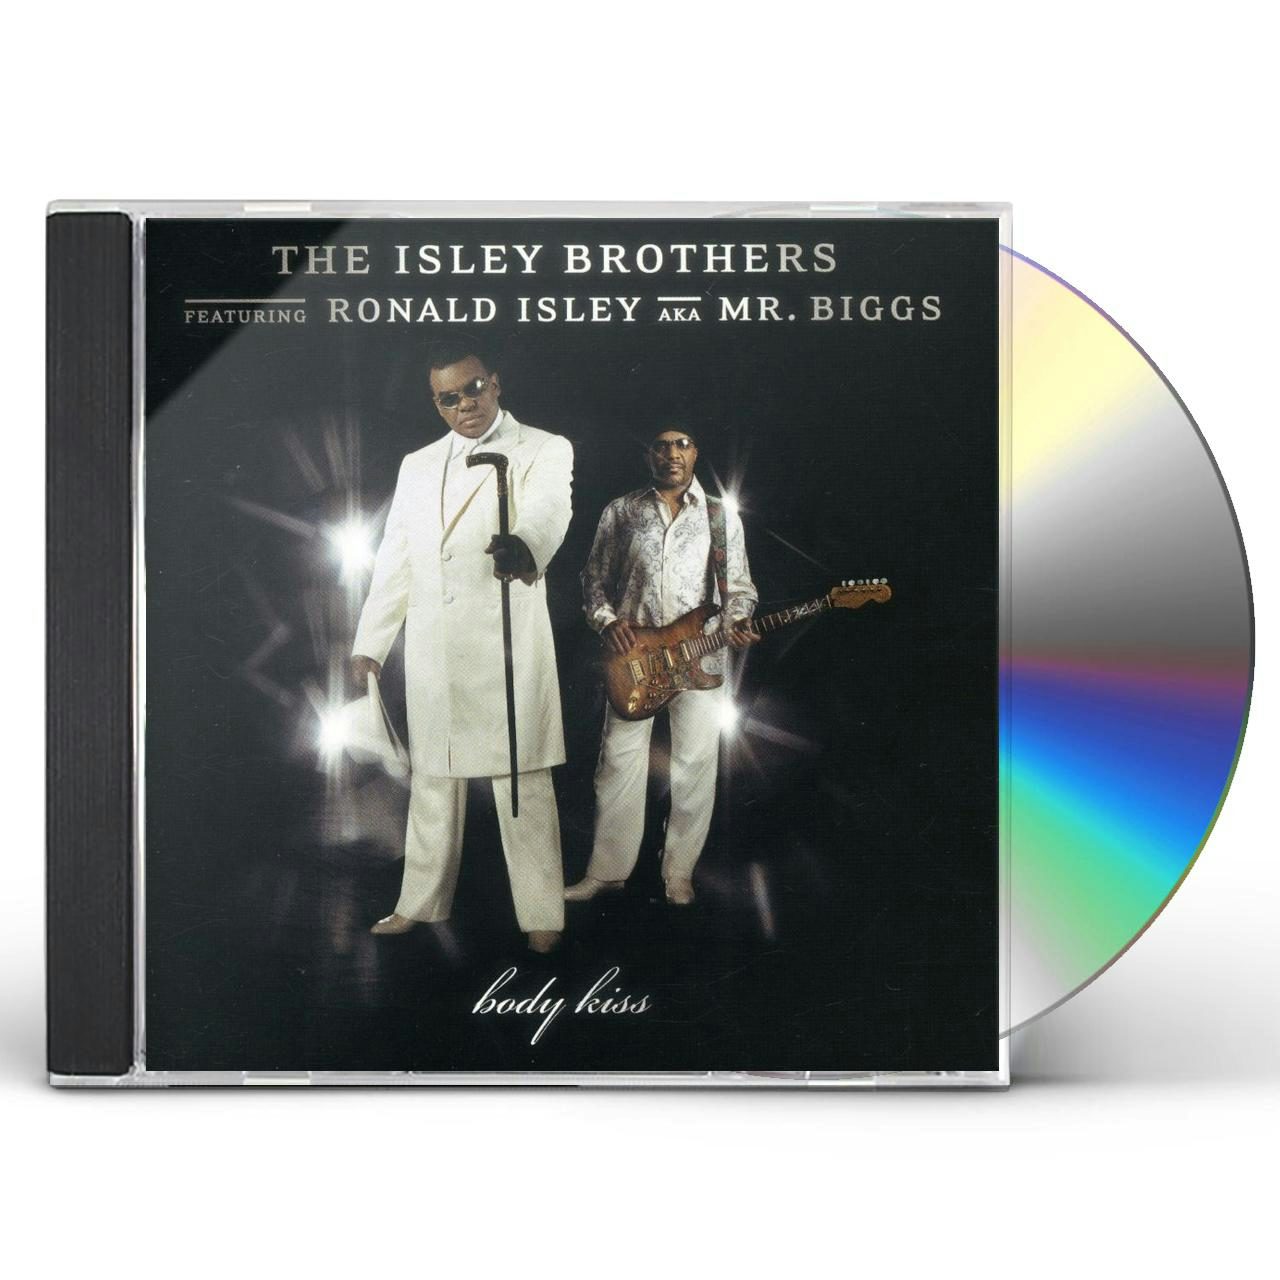 The Isley Brothers BODY KISS CD